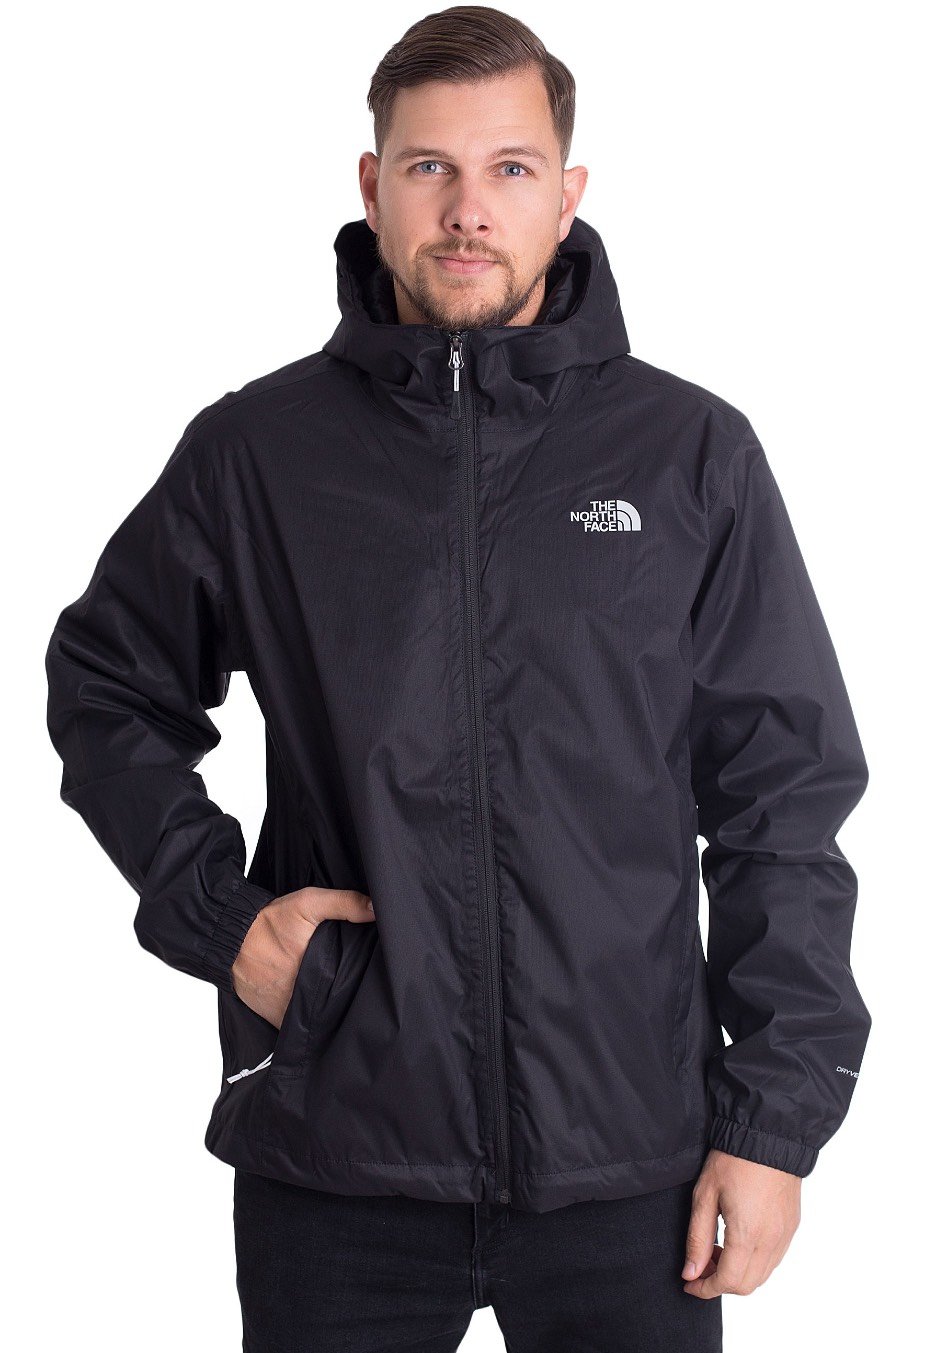 The North Face - Quest - Jacket